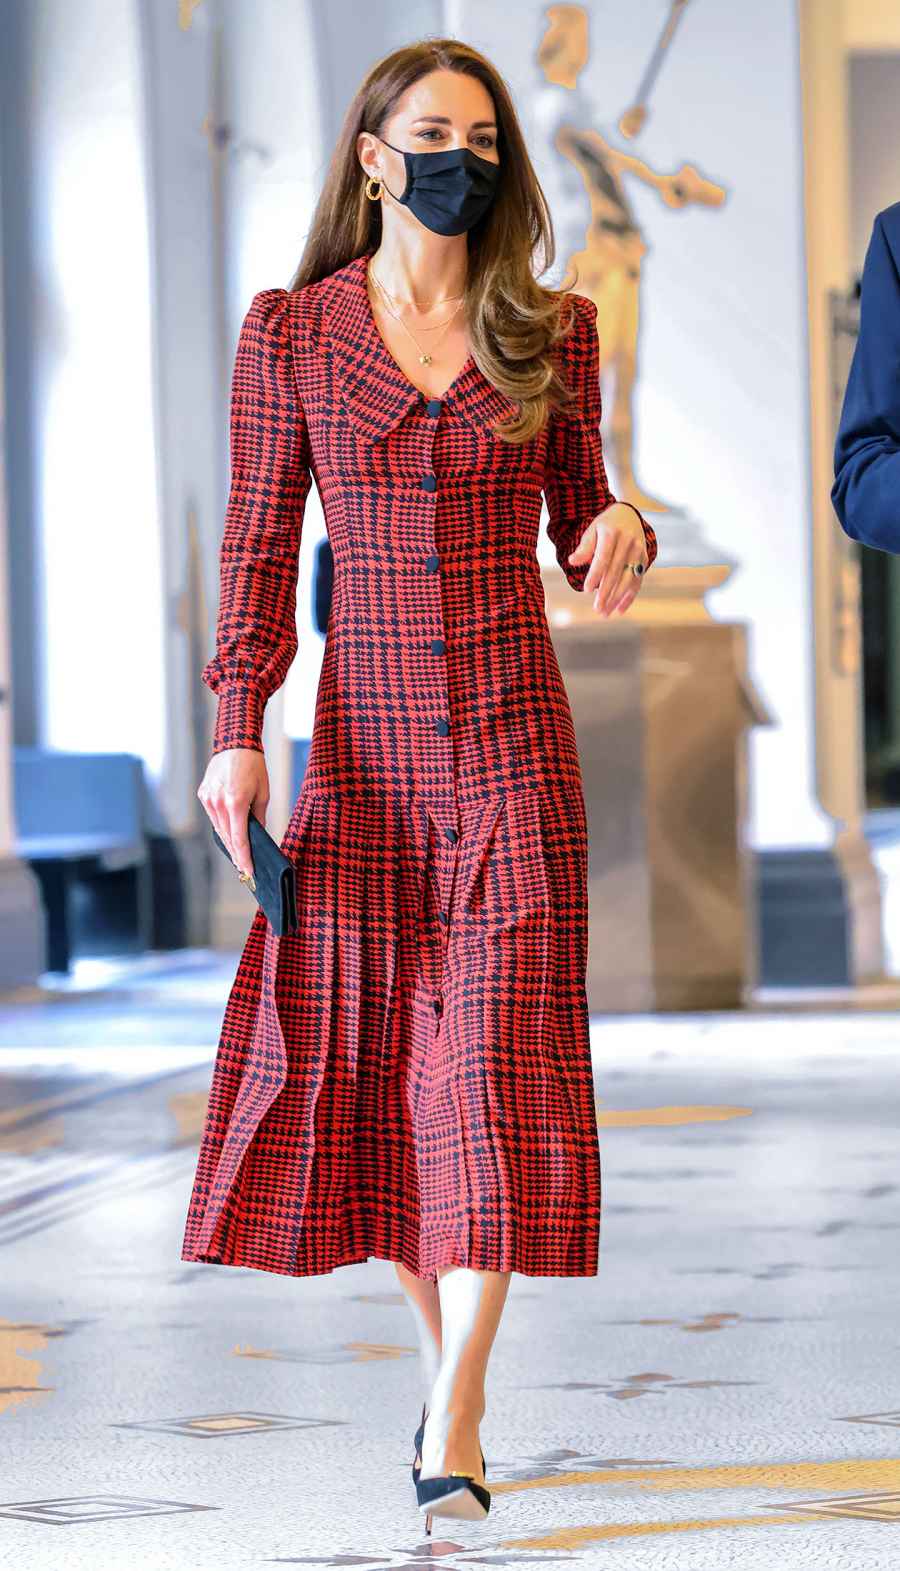 Duchess Kate’s Houndstooth Coat Dress May Be Her Chicest Yet: Pic